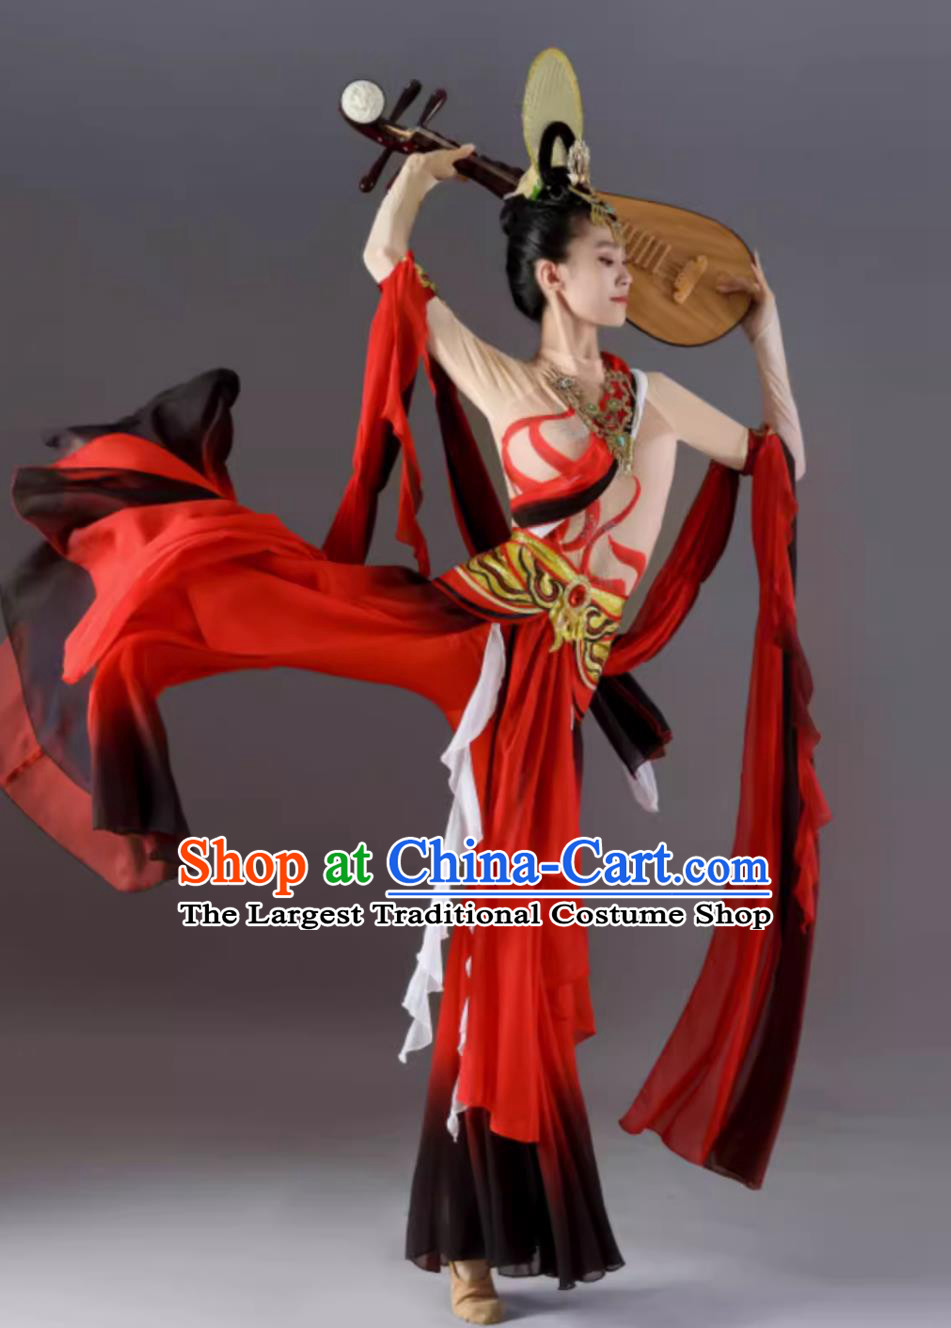 Dunhuang Feitian Dance Costume Exotic Performance Clothing Ancient Chinese Super Immortal Classical Dance Dress